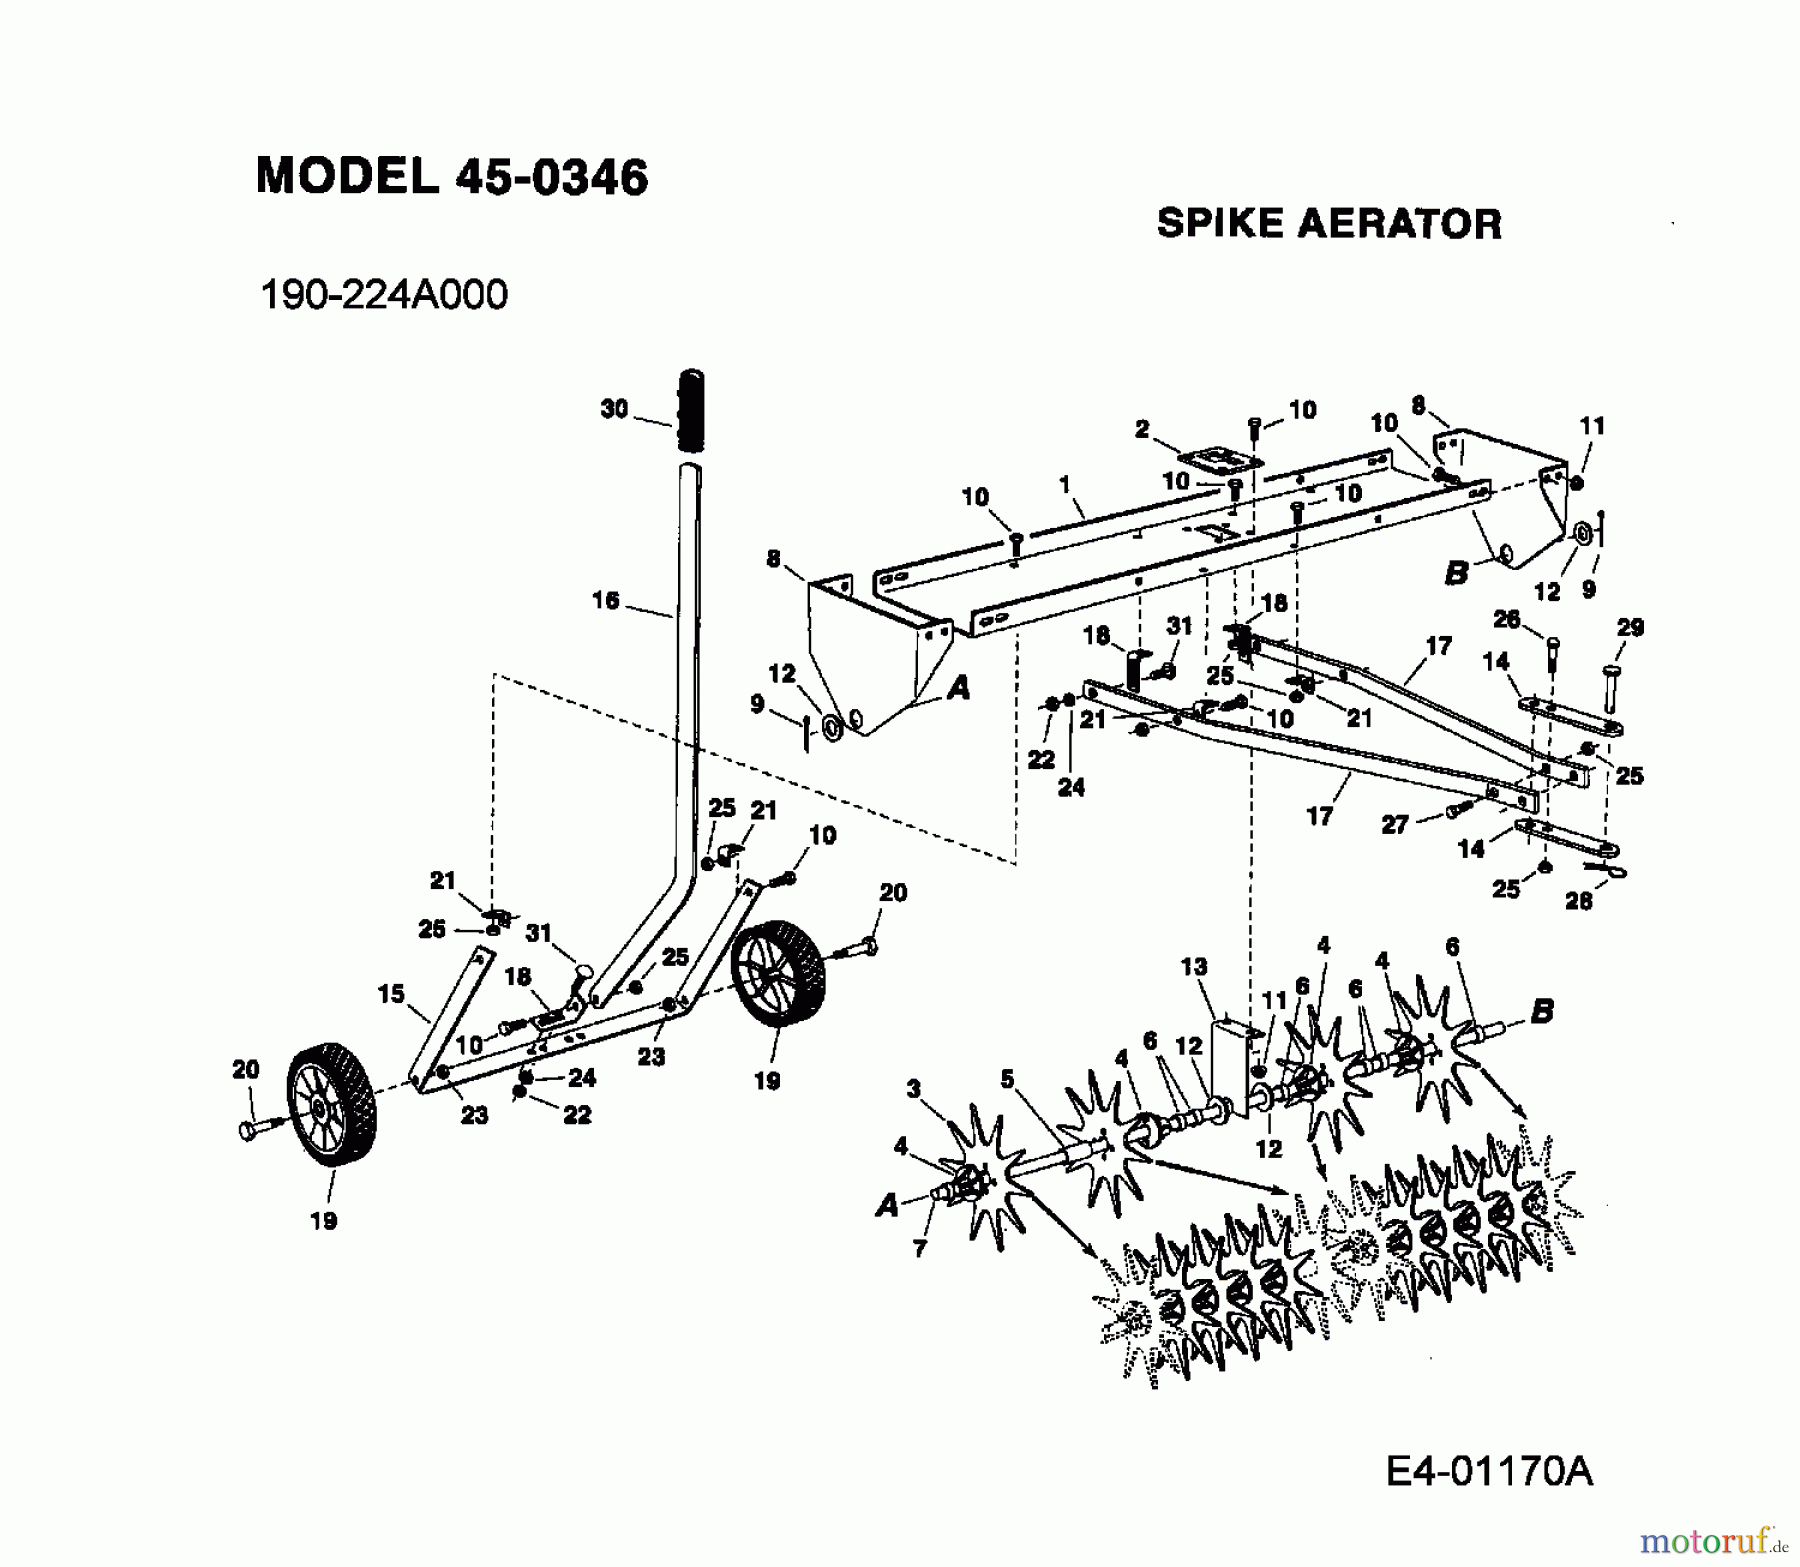  MTD Accessories Accessories garden and lawn tractors Groomer 45-0346  (190-224A000) 190-224A000  (2015) Basic machine